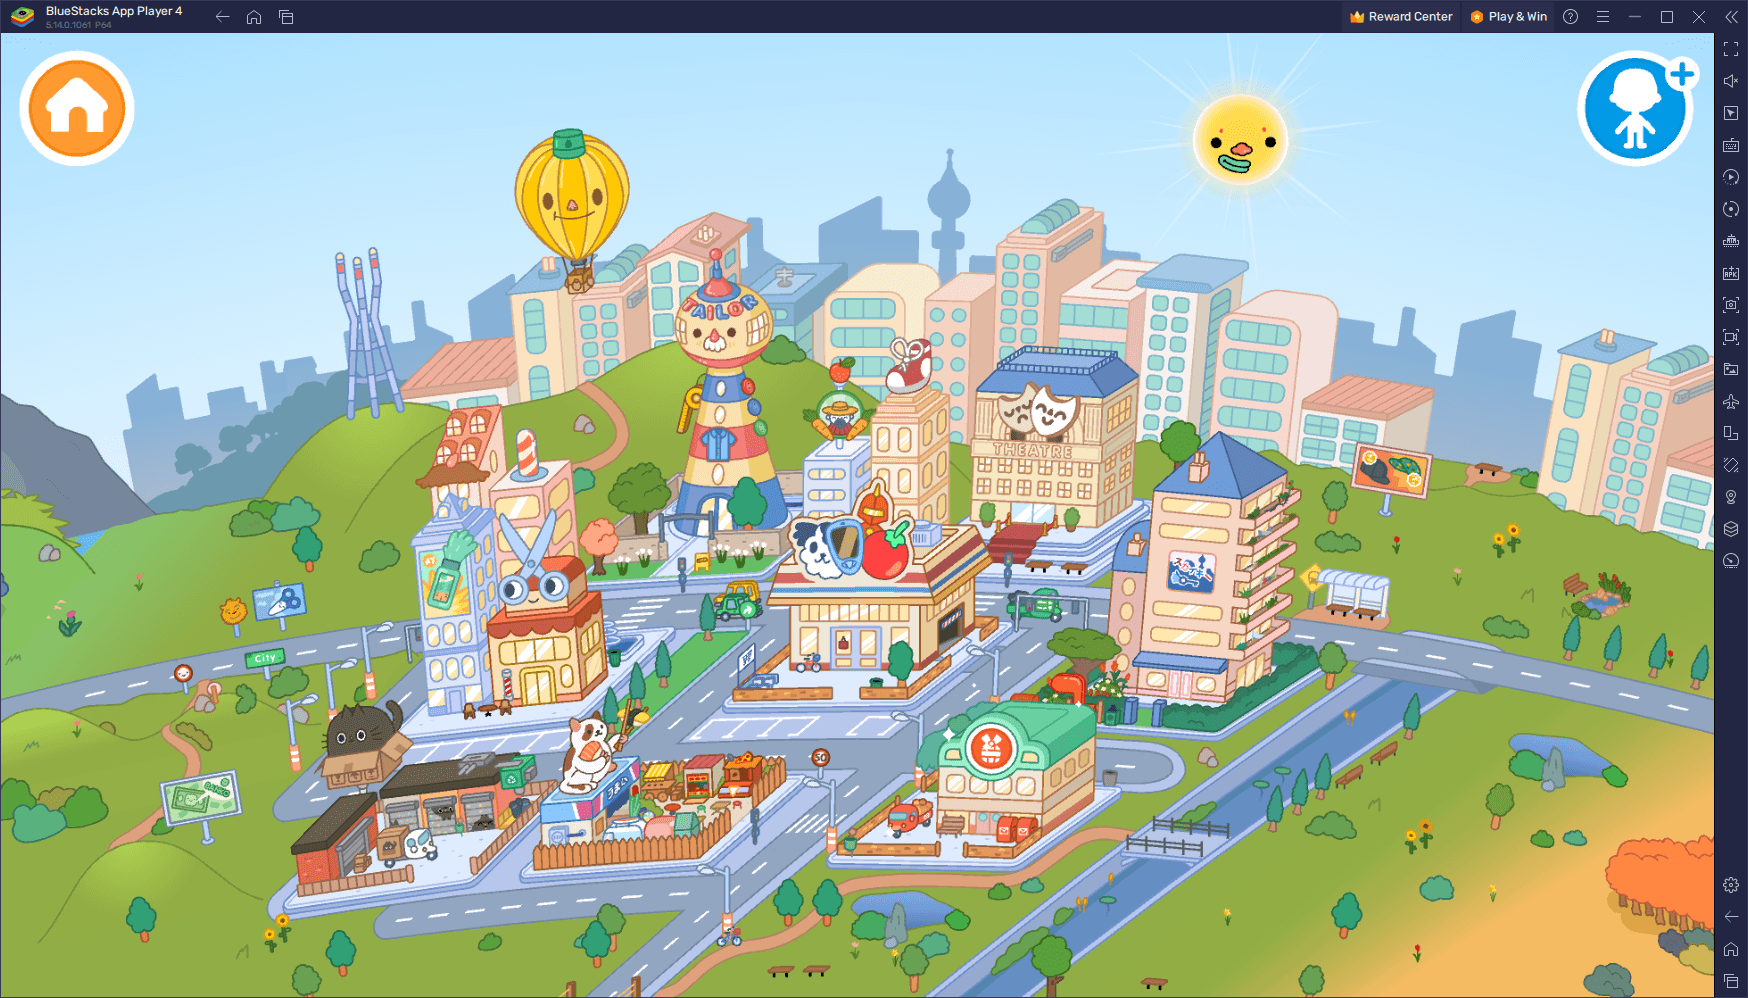 Experience Toca Life World at 240 FPS - The Ultimate BlueStacks Advantage